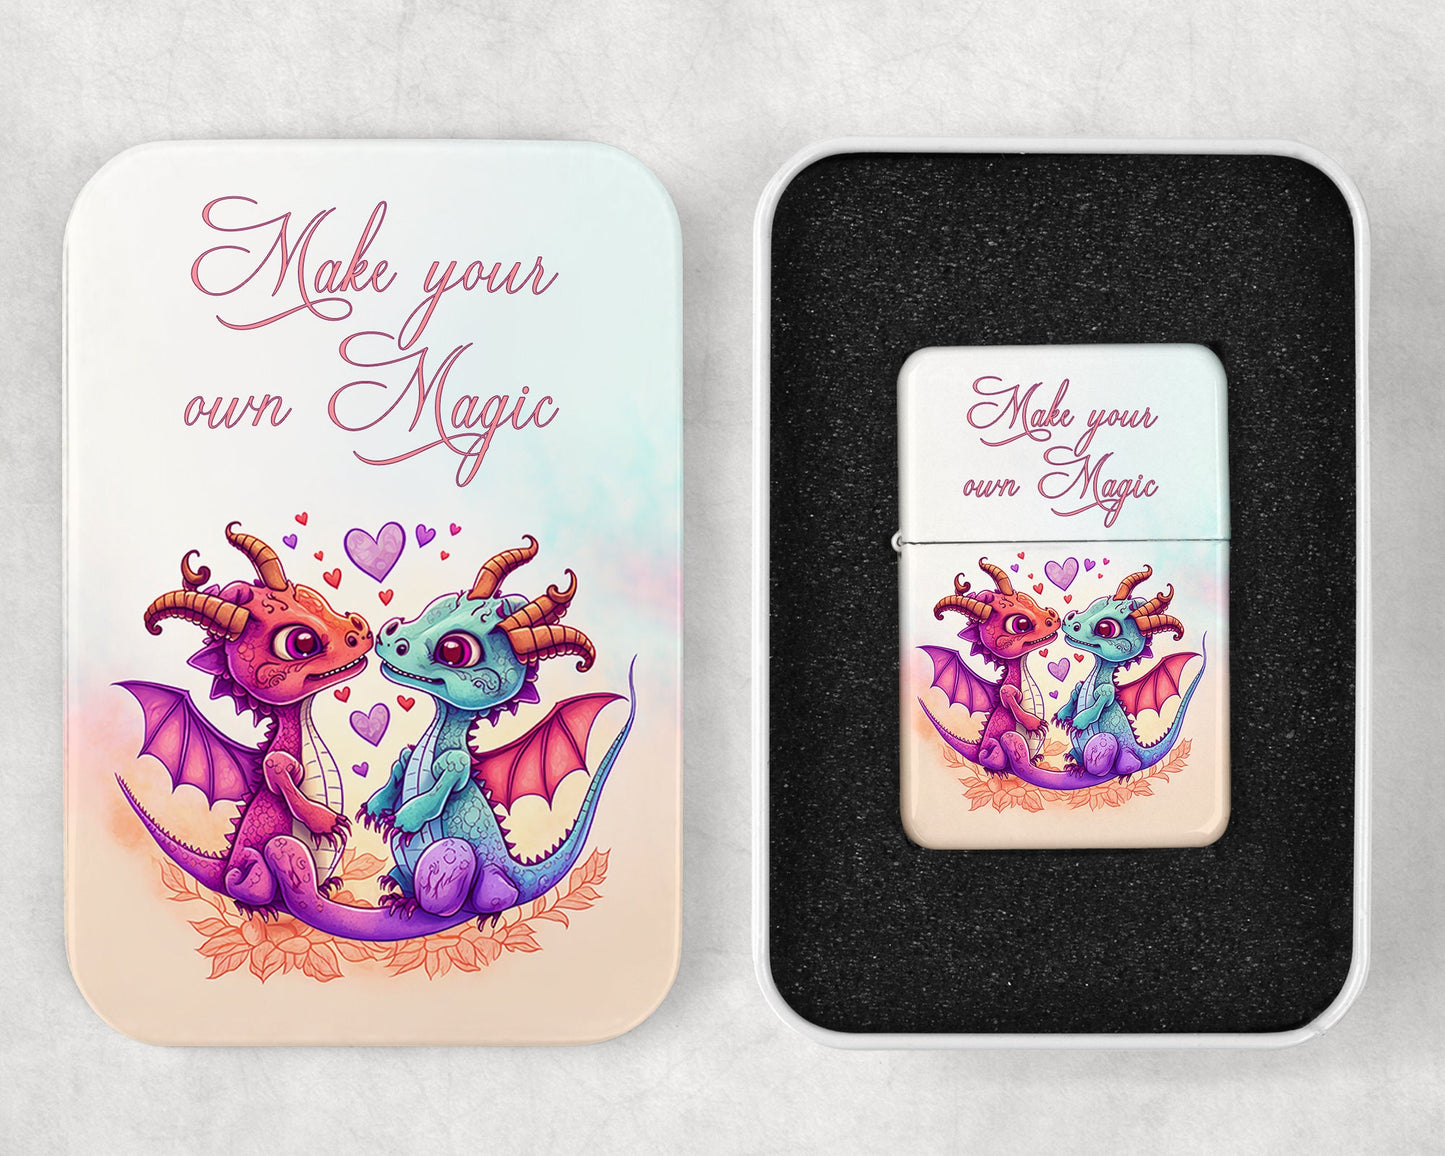 Cute Watercolor Dragons Couple Art Flip Top Lighter and Matching Gift Tin